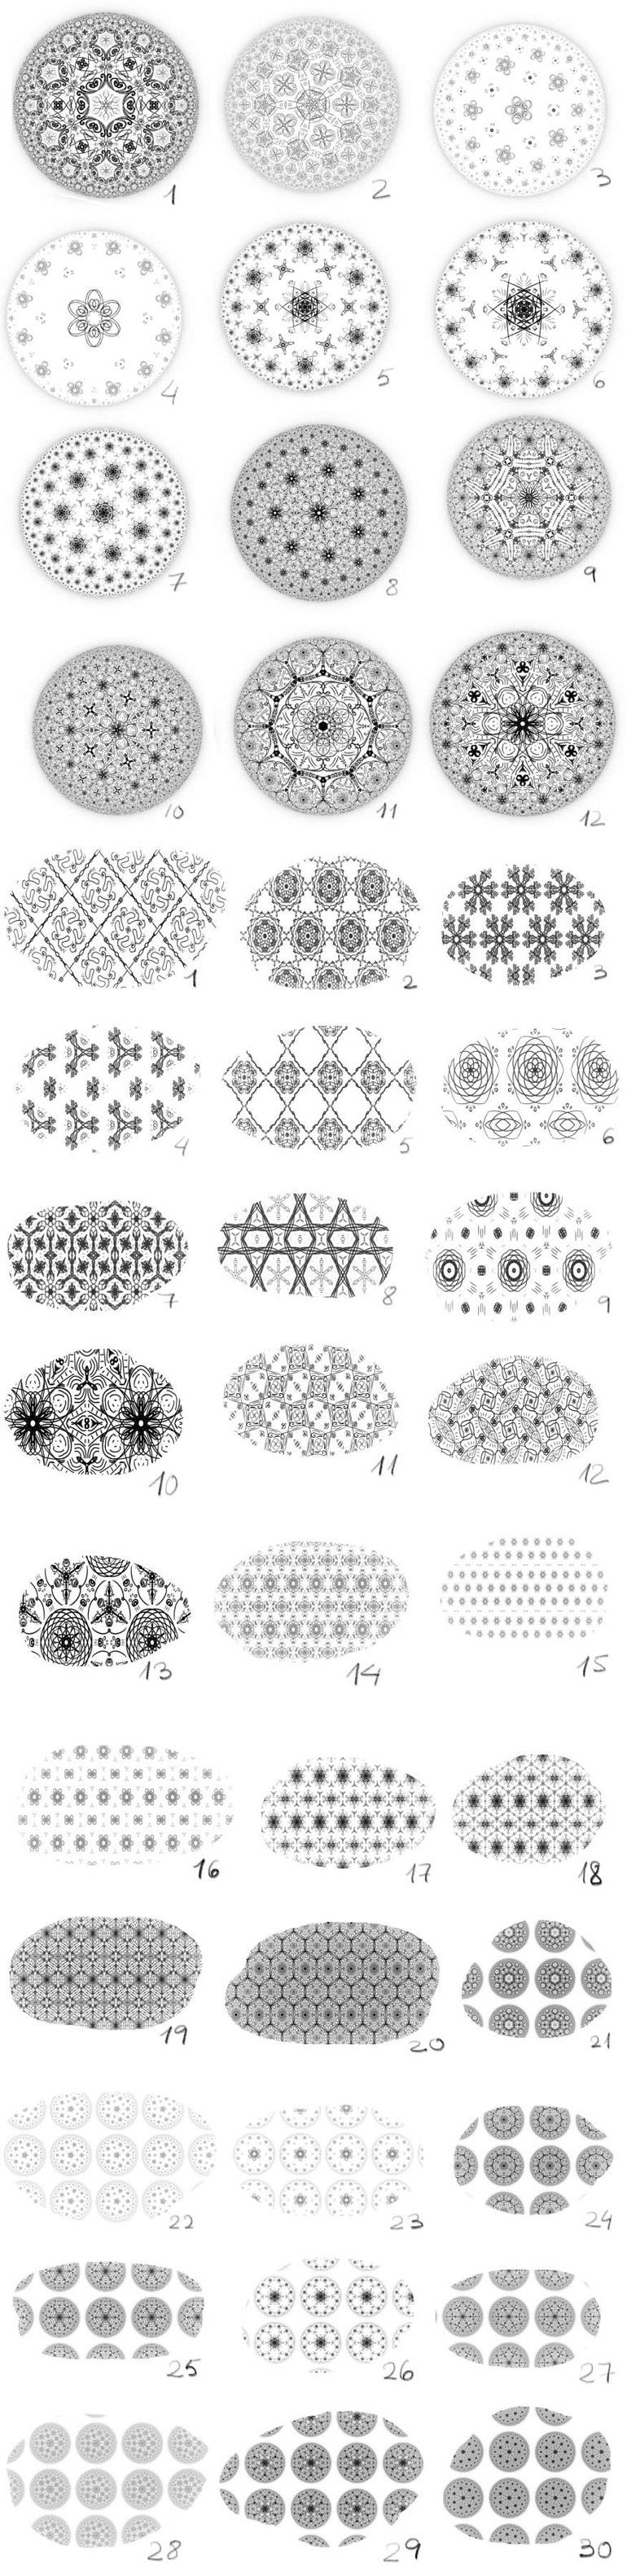 Free pattern brushes and Mandala stamps